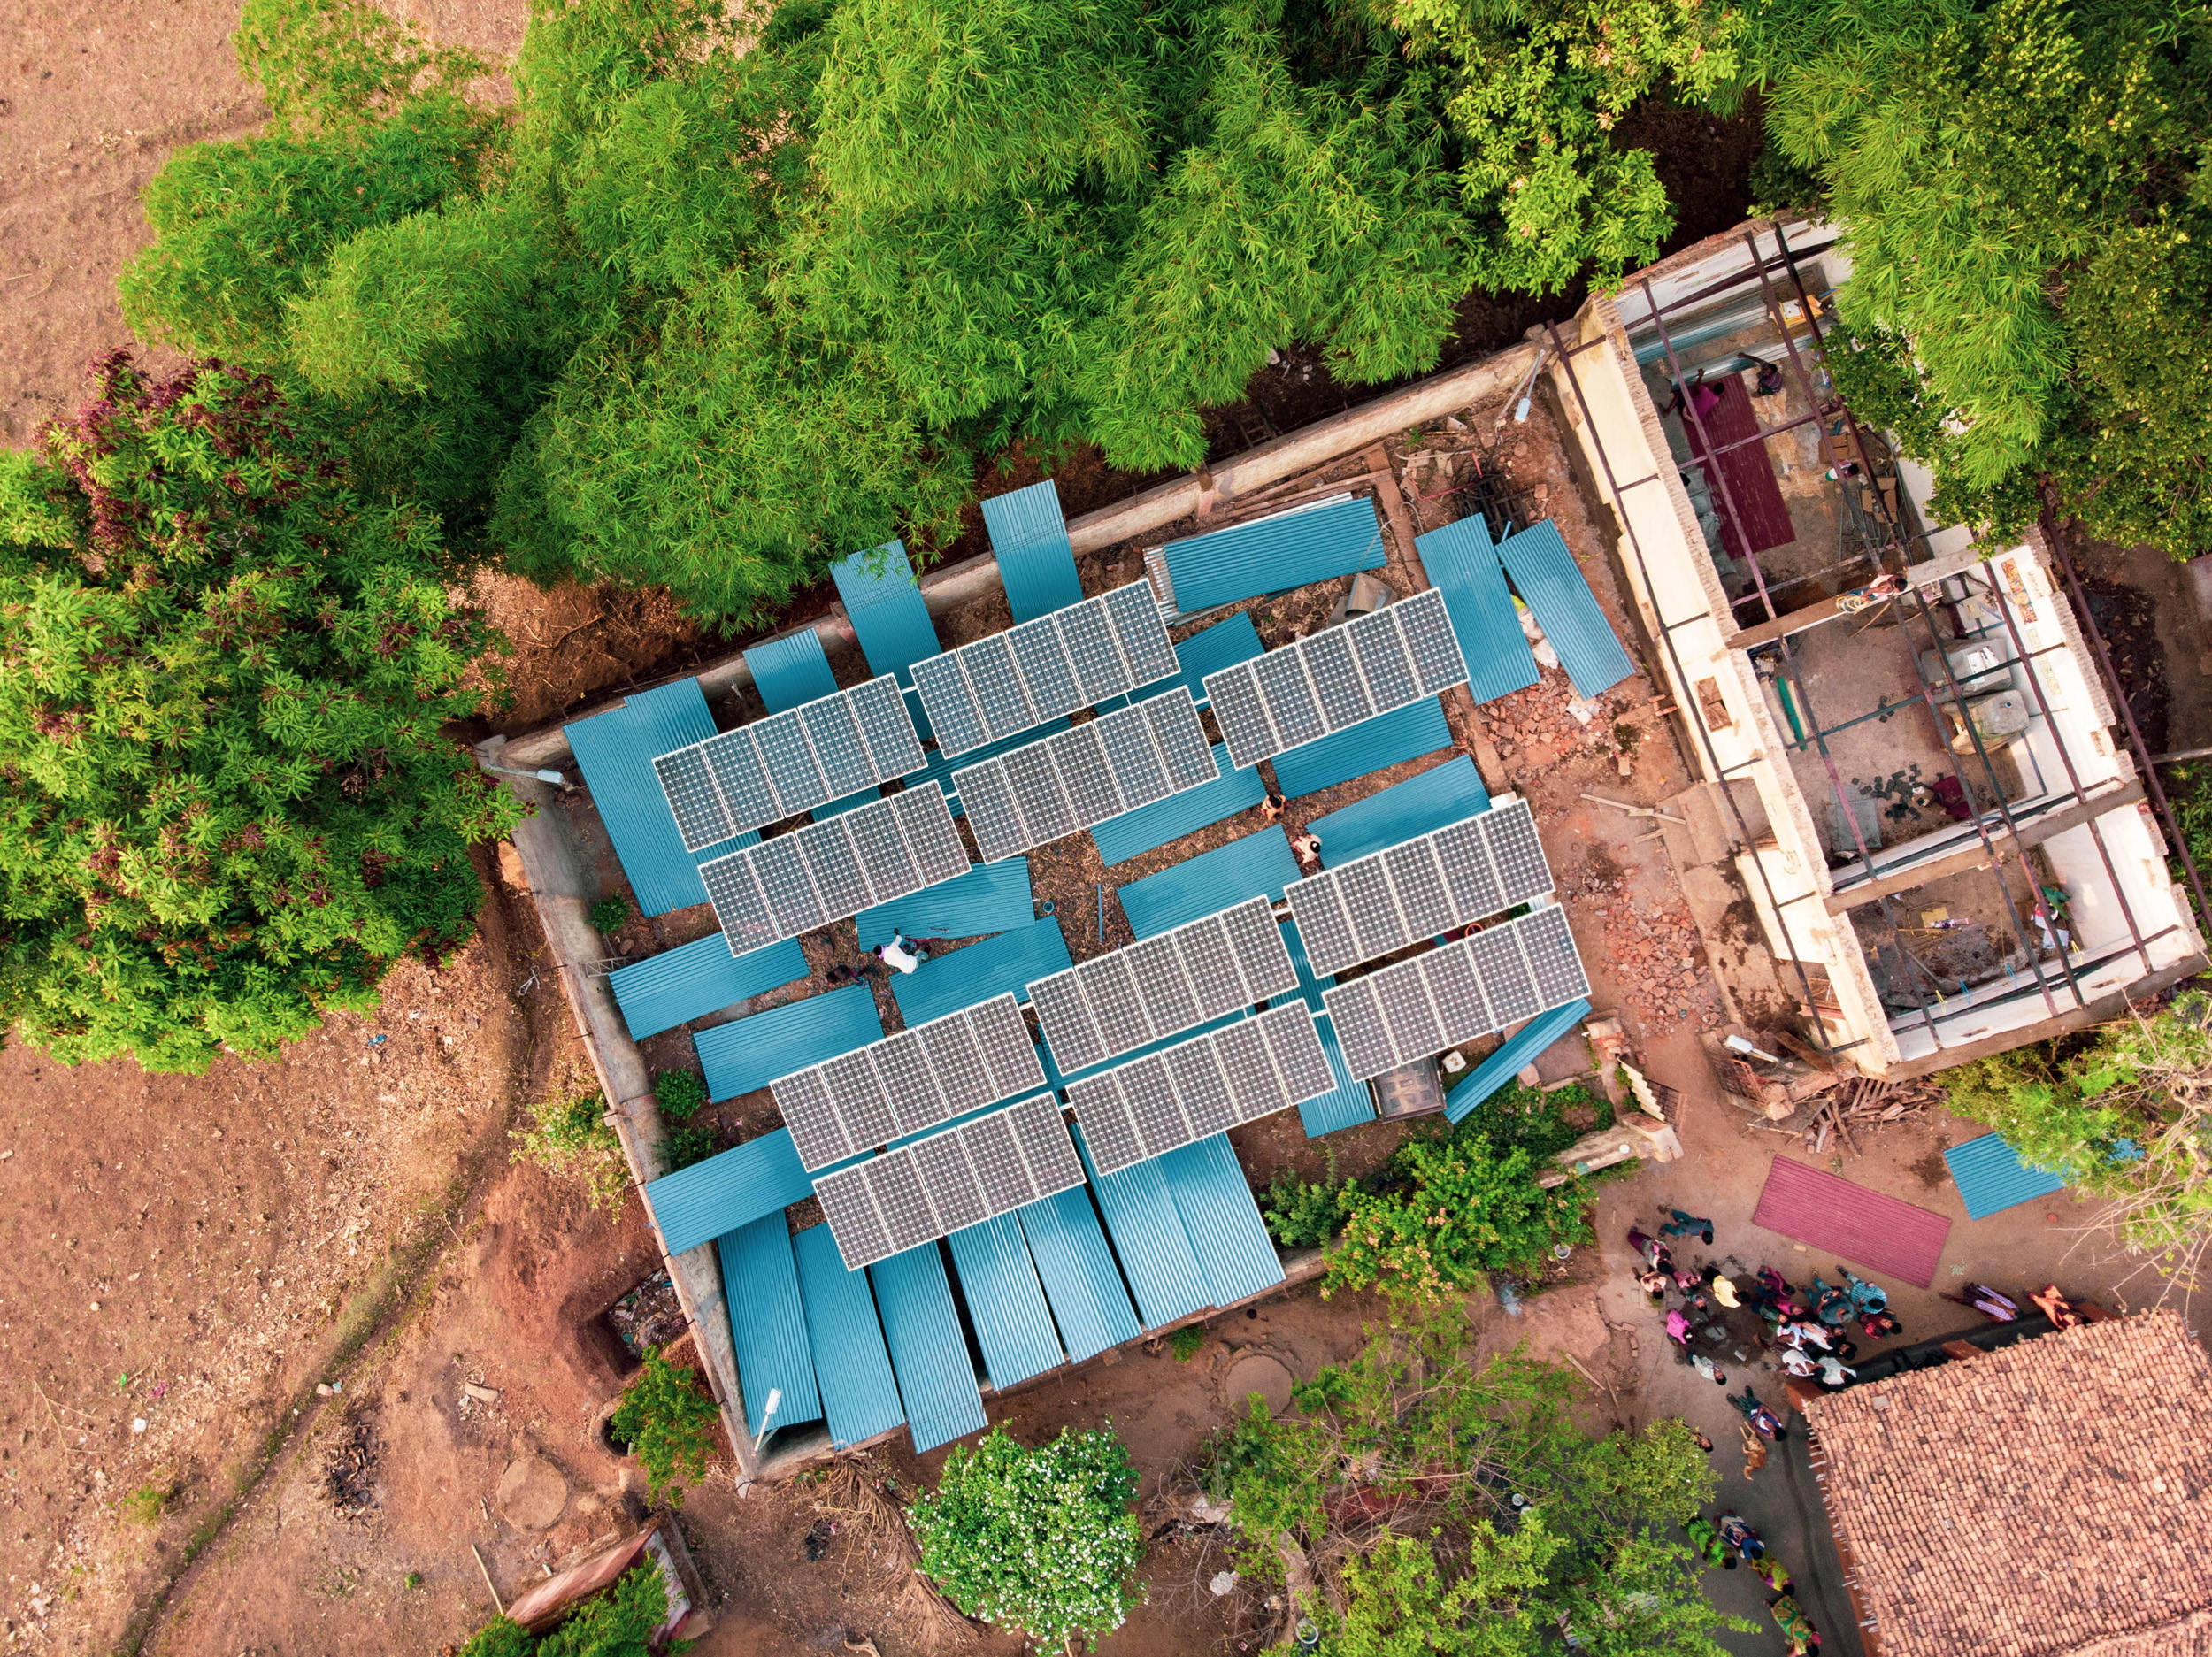 A drone shot of the construction site. Newly painted roofing sheets dry among the solar panels. Photo credit: Ajaya Behera.